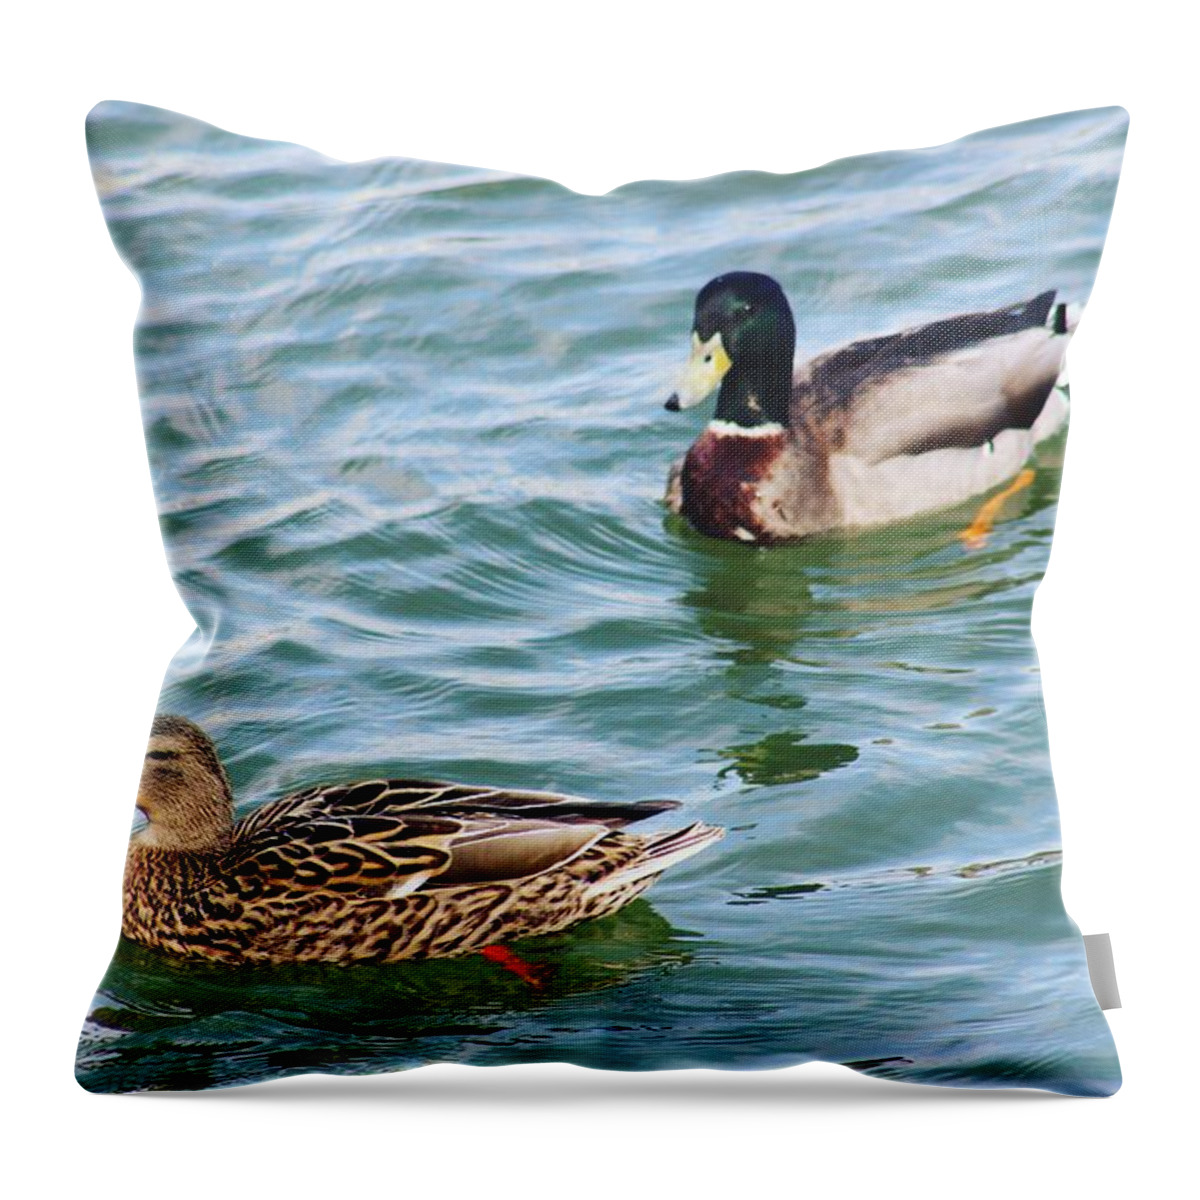 Wildlife River Duck Ducks Animal Waterfront Water Summer Usa America Virginia U.s.a Us Oldtown Alexandria Bird Birds Green Nature Landscape Photo Photography Throw Pillow featuring the digital art A Beautiful Couple by Jeanette Rode Dybdahl